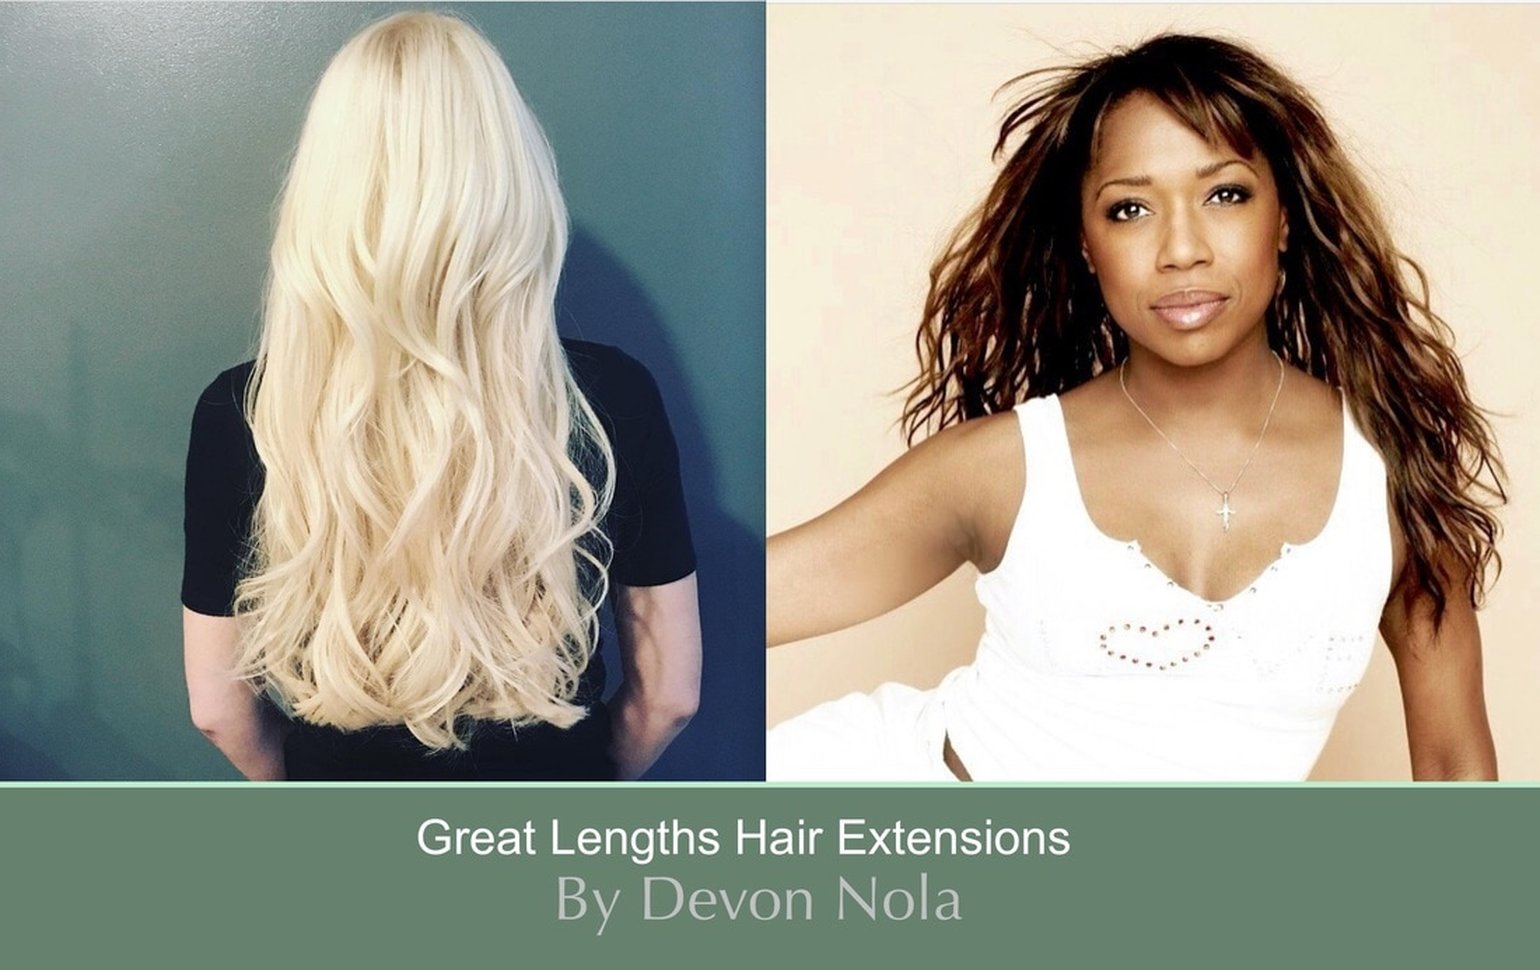 Hair Extensions Manhattan NYC Great Lengths Hair Extensions